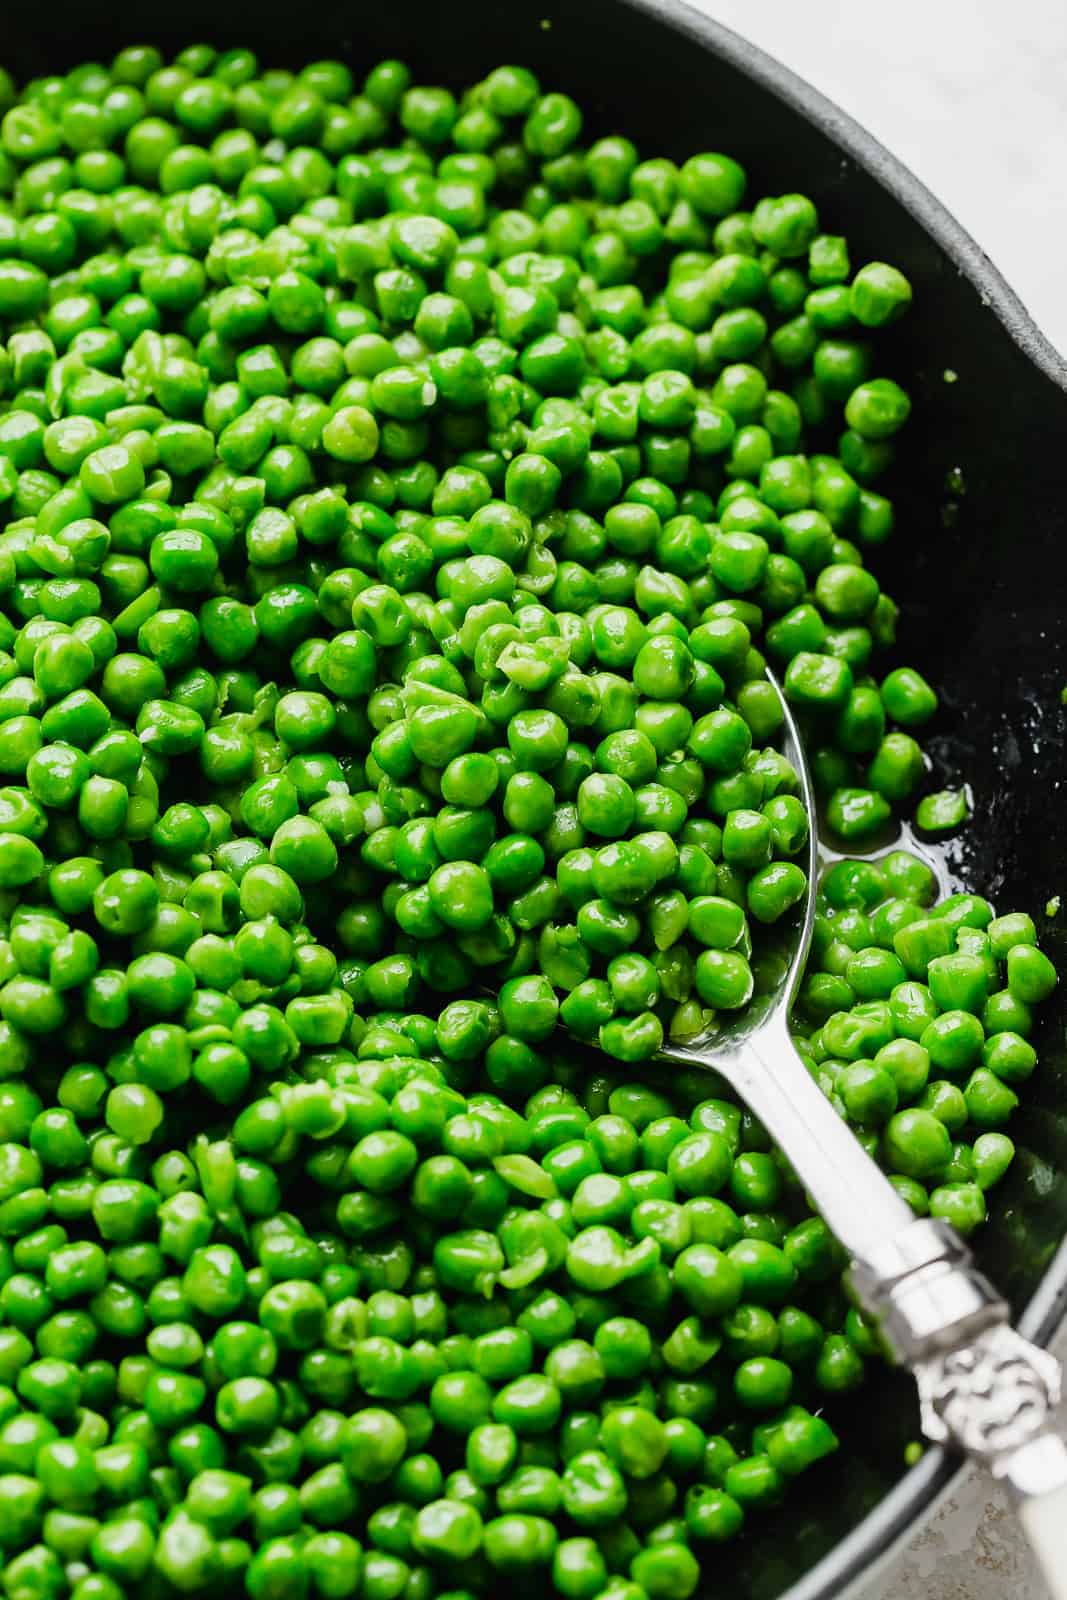 A serving spoon scooping up freshly cooked green peas from a skillet.